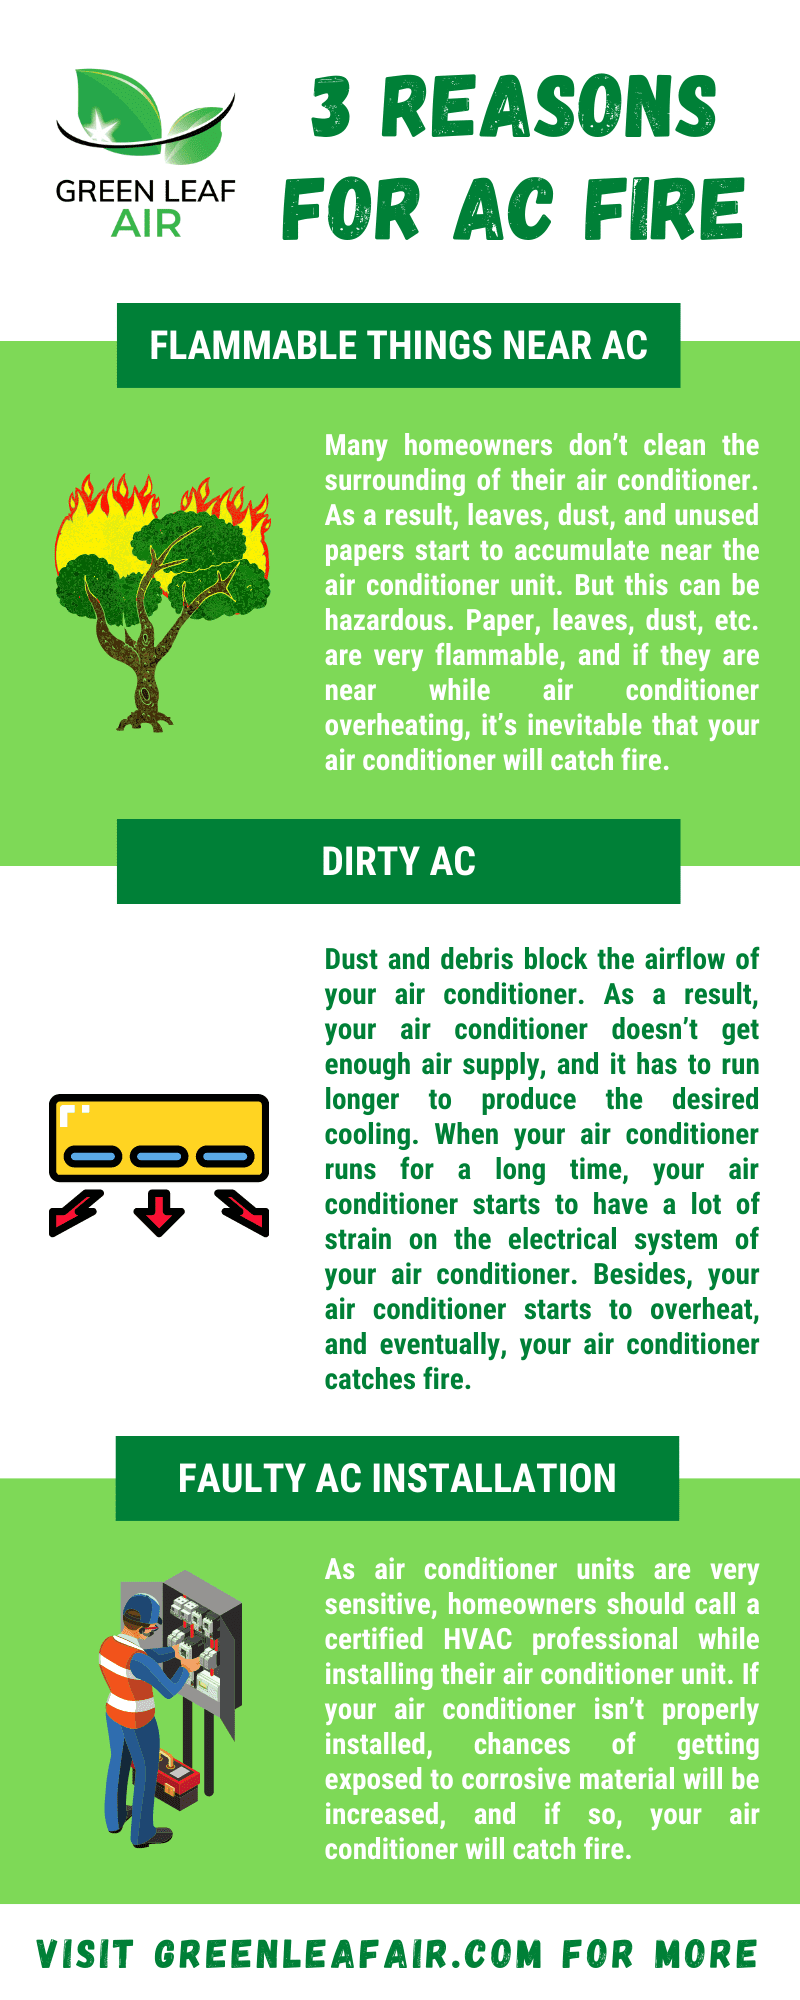 3 Reasons for AC Fire